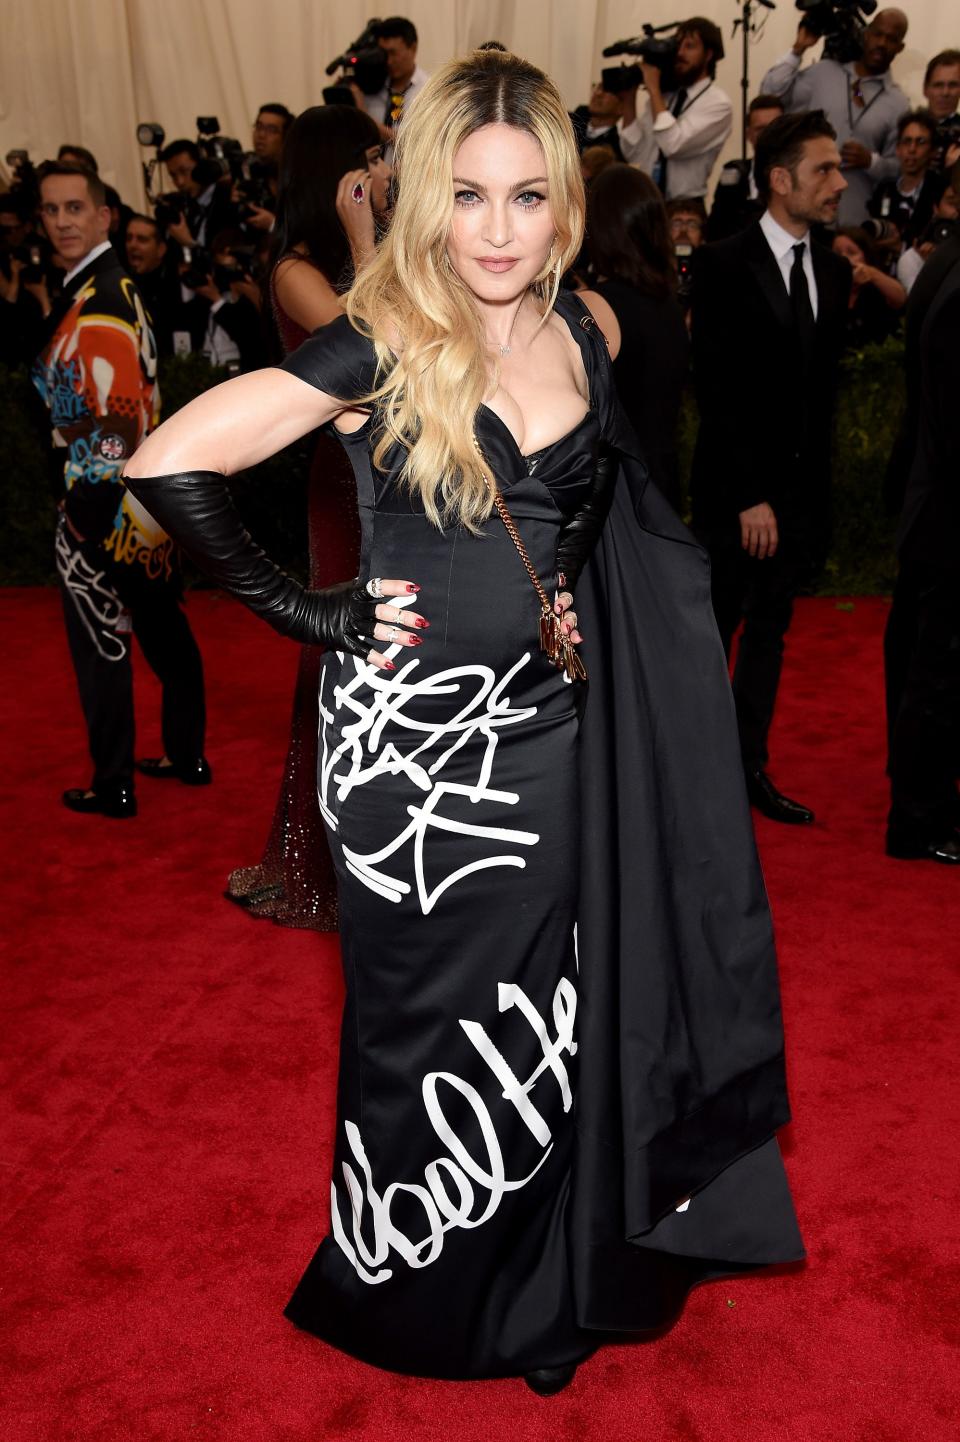 <h1 class="title">Madonna in a Moschino dress, Jennifer Fisher necklace, and Lynn Ban jewelry</h1><cite class="credit">Photo: Getty Images</cite>